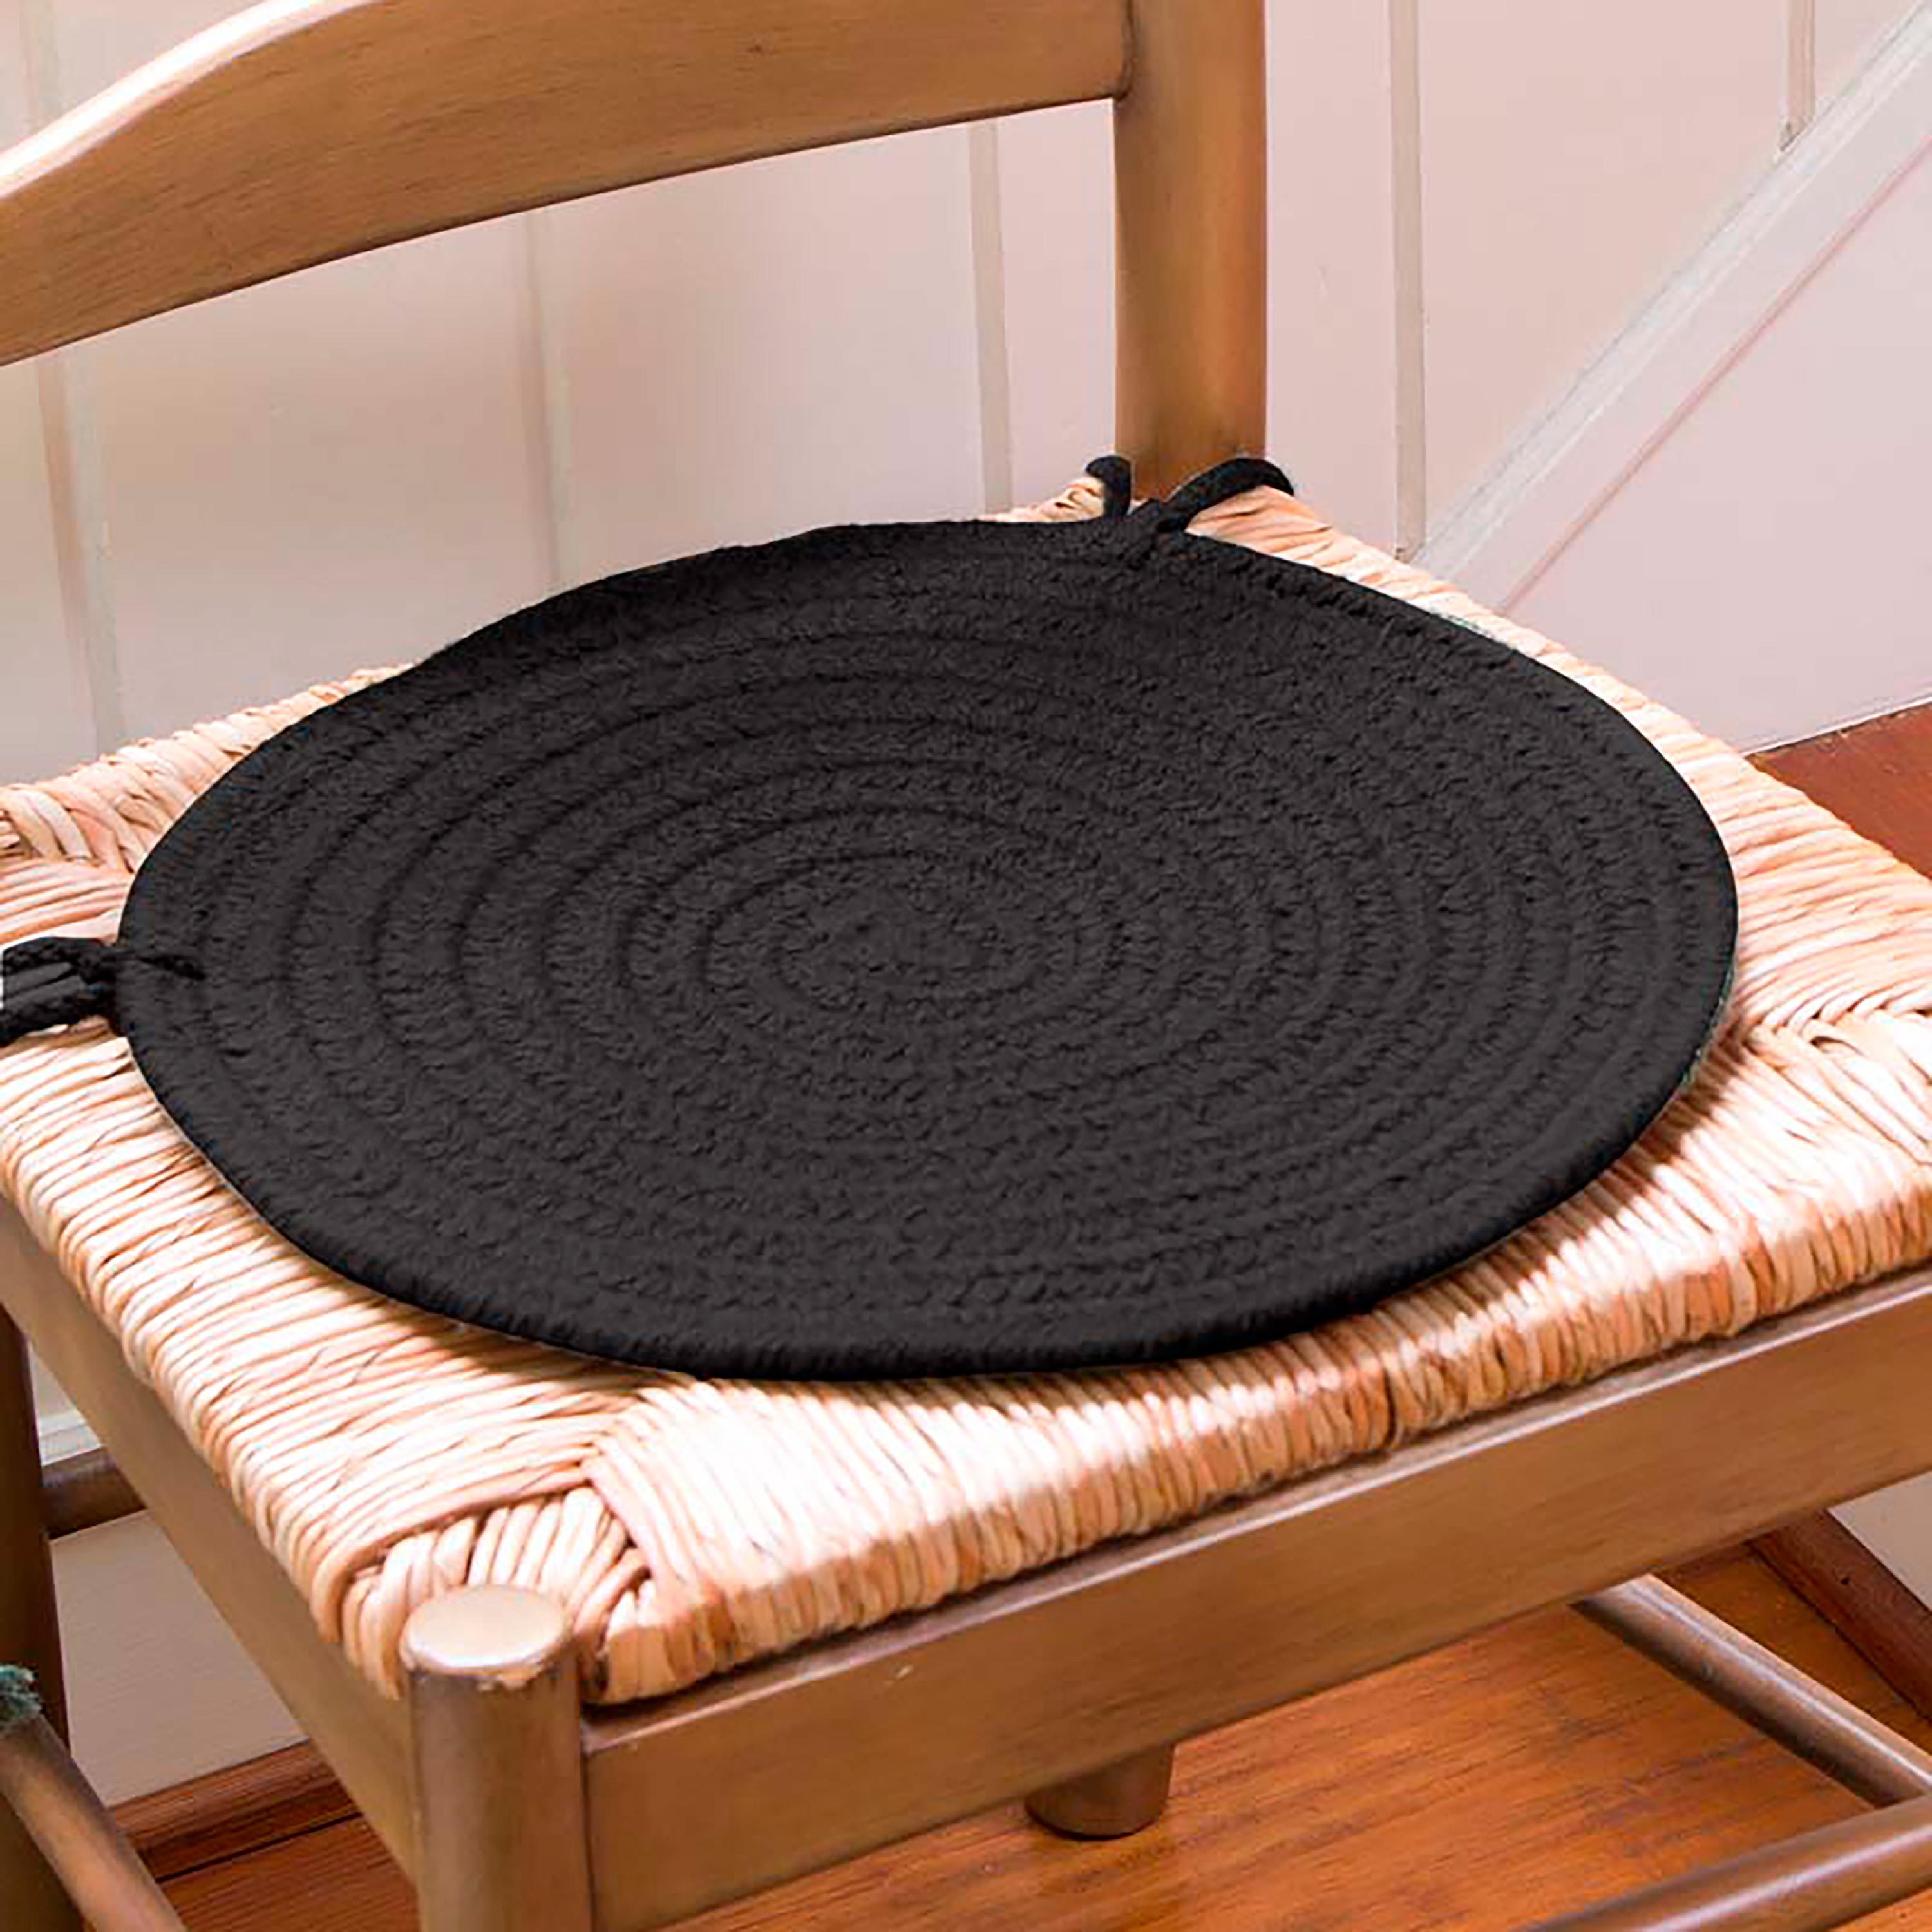 Image of 15" Dia. Color Country Classic Braided Polypro Chair Pad, in Black